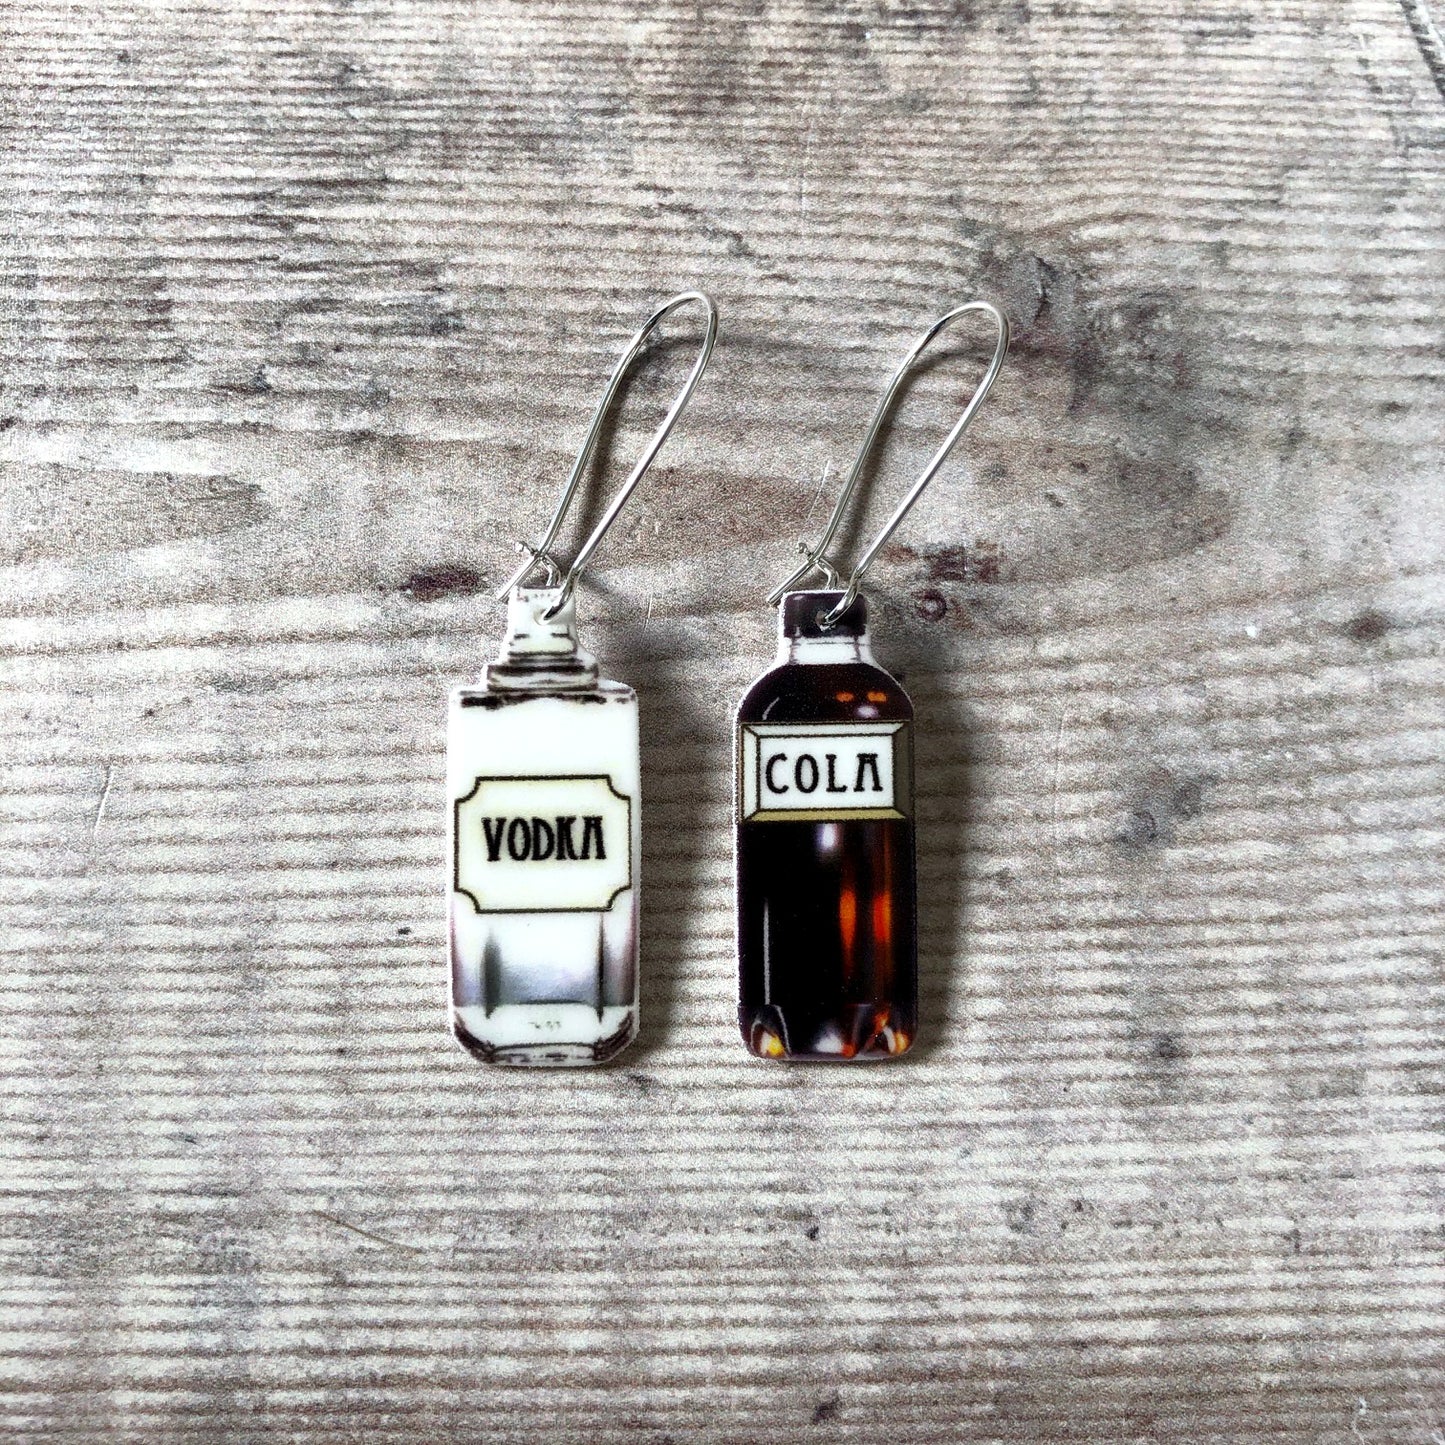 Vodka and cola bottle drop earrings - Quirky friend gift